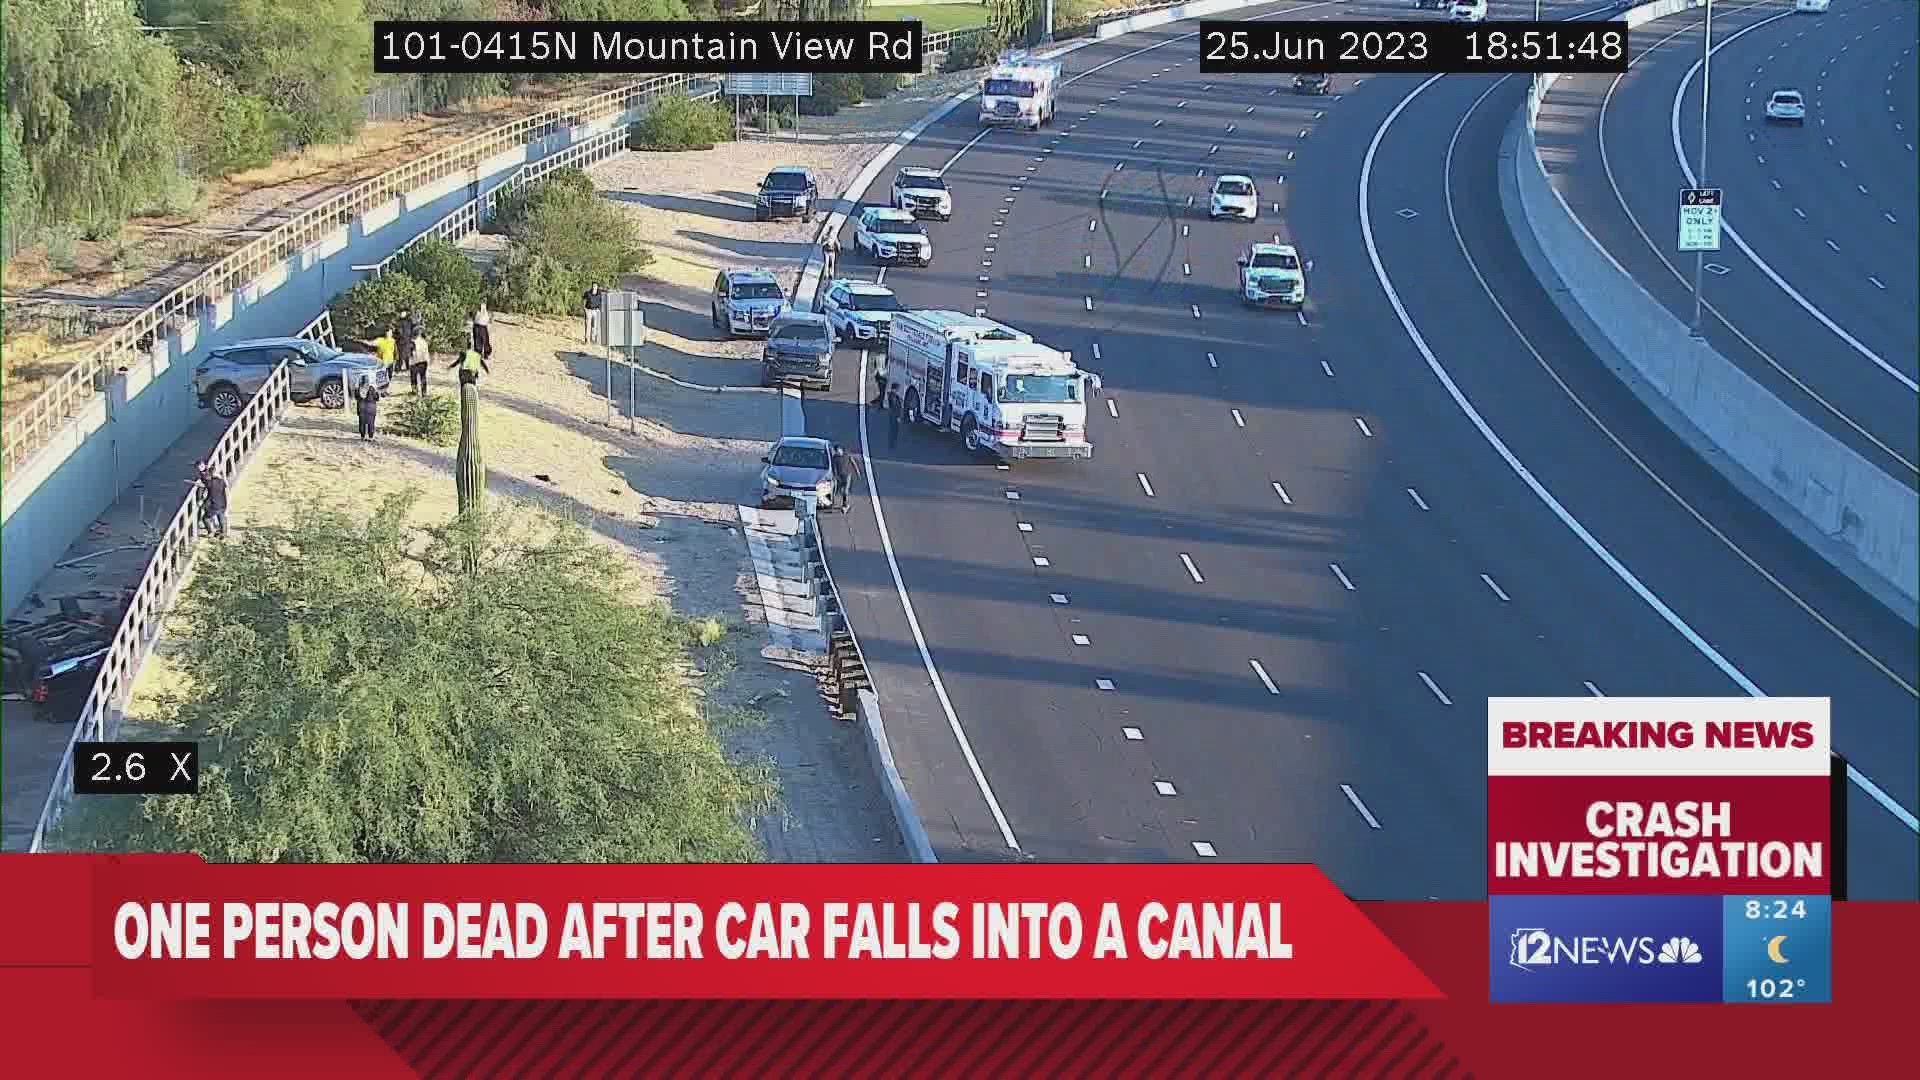 The incident happened Sunday evening near Loop 101 and Mountain View Road, authorities said